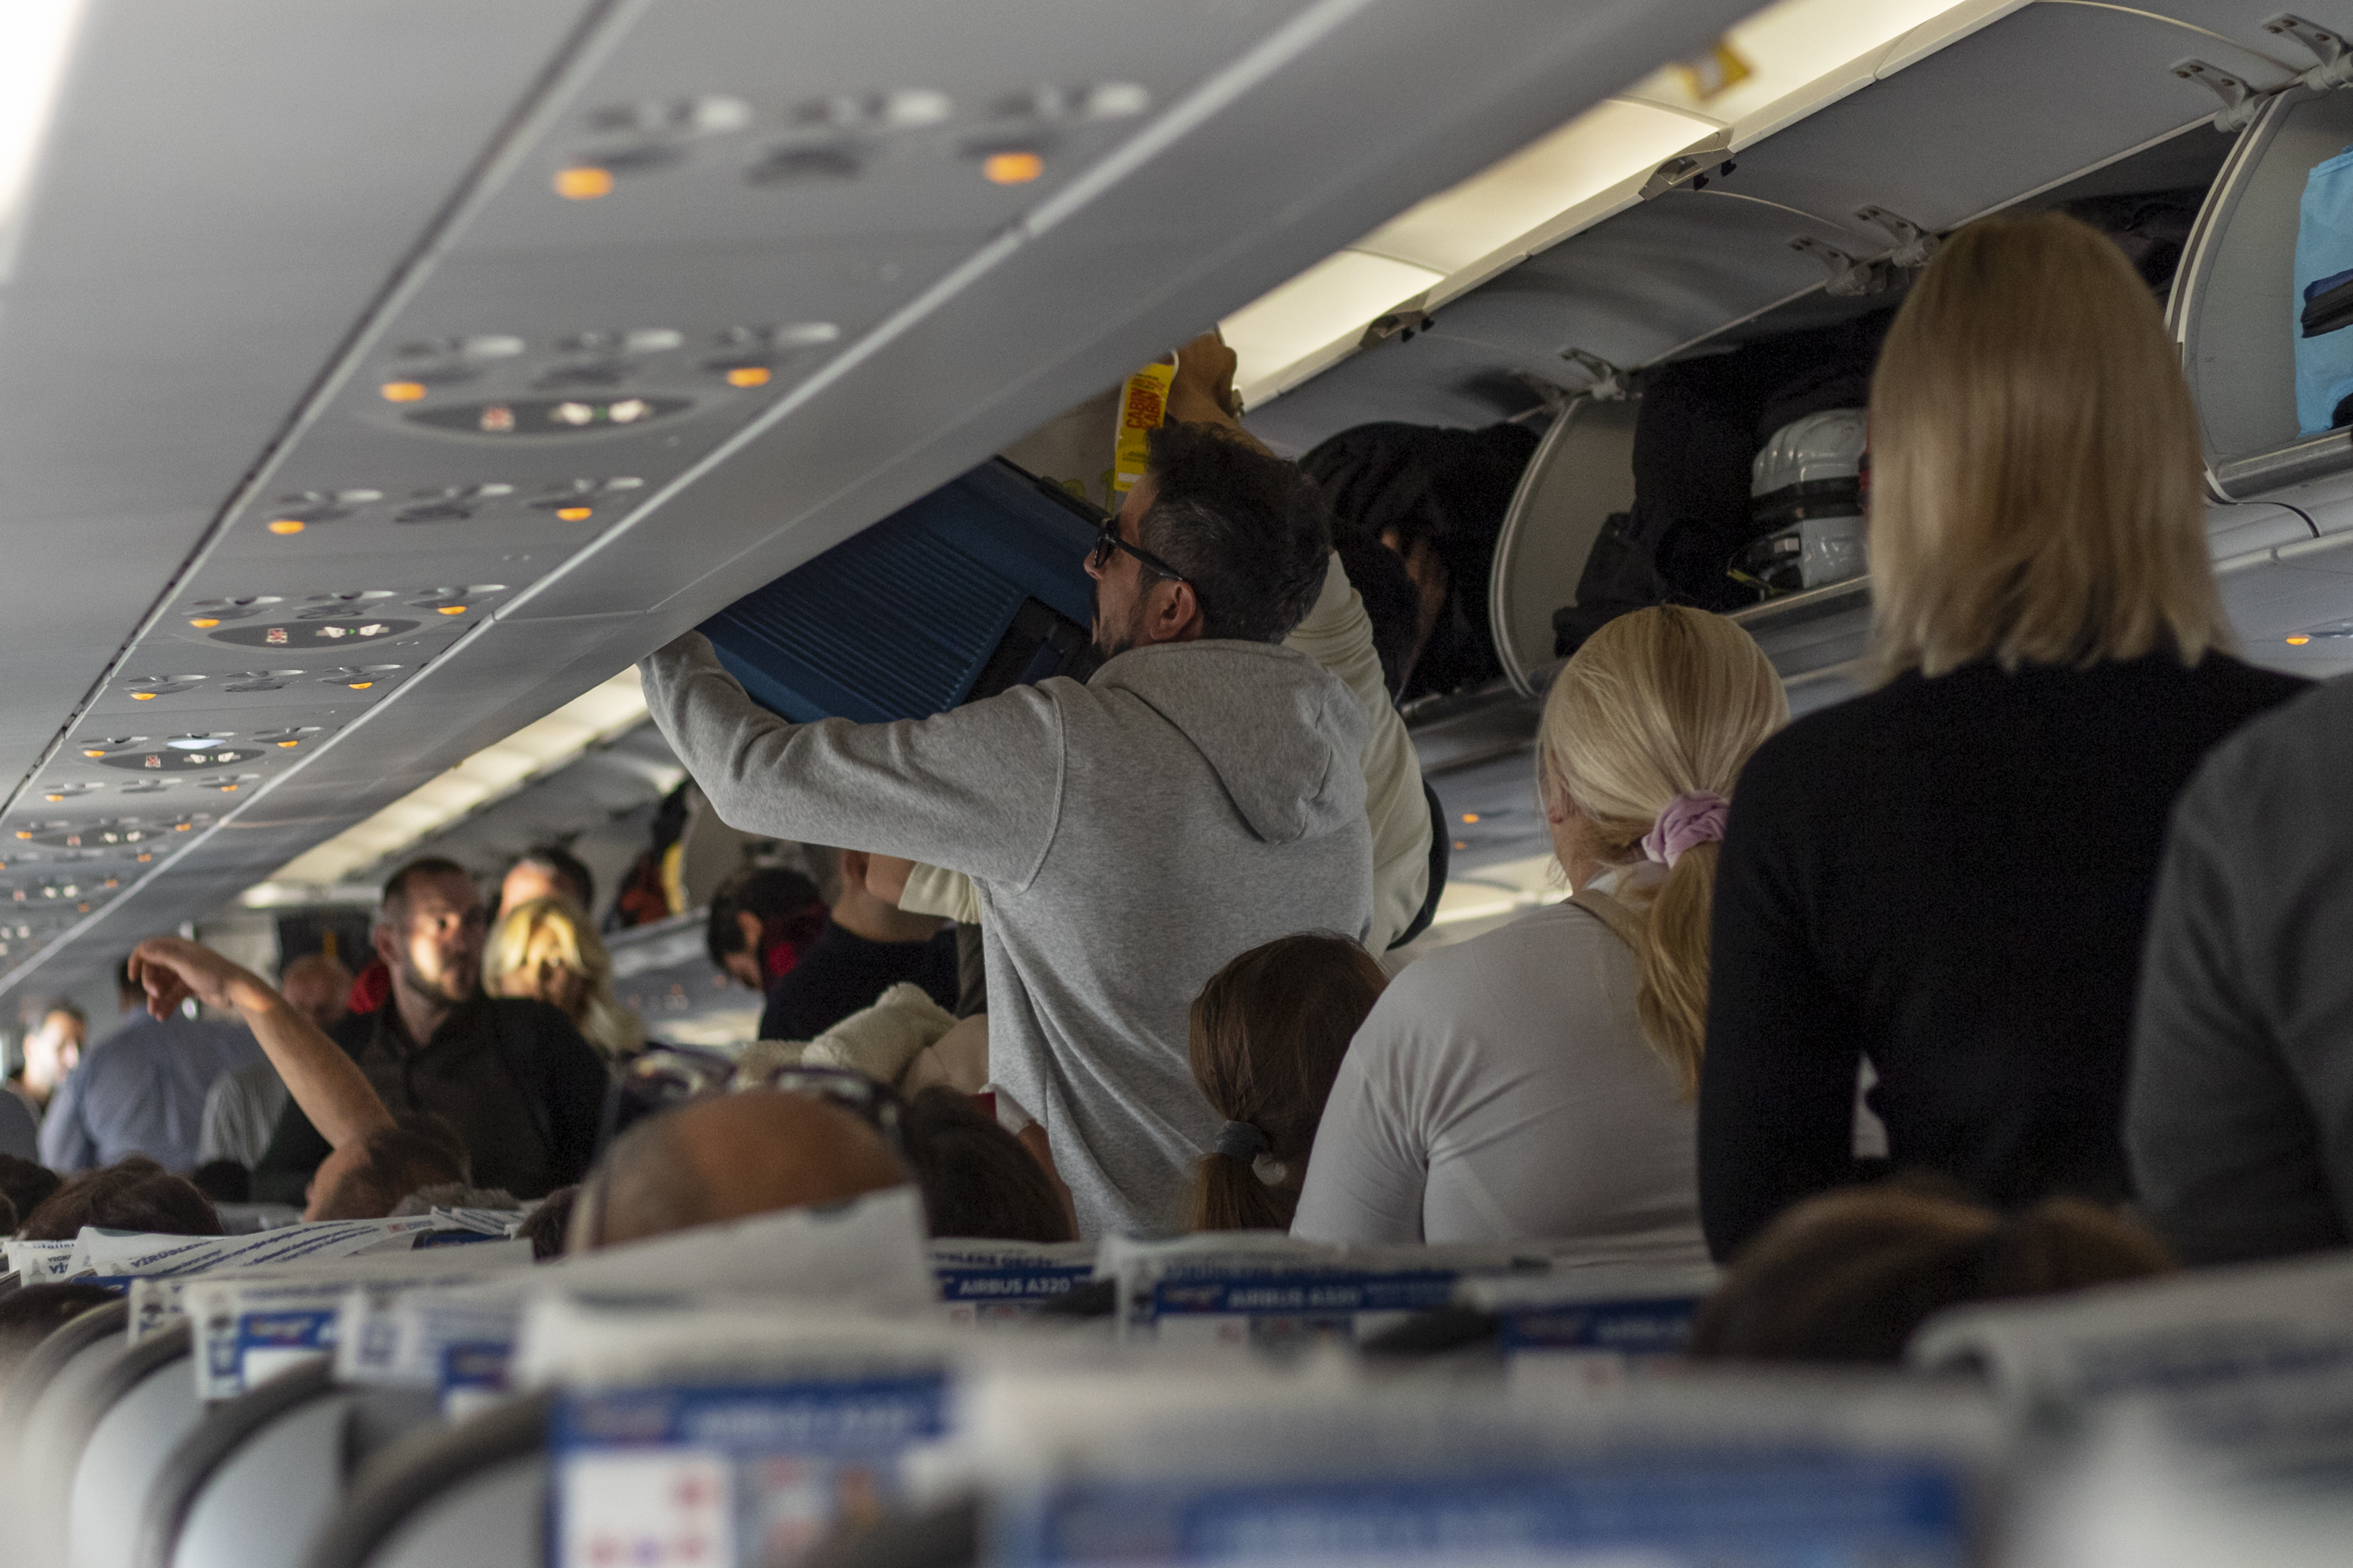 Passengers seen fighting for space in the overhead lockers